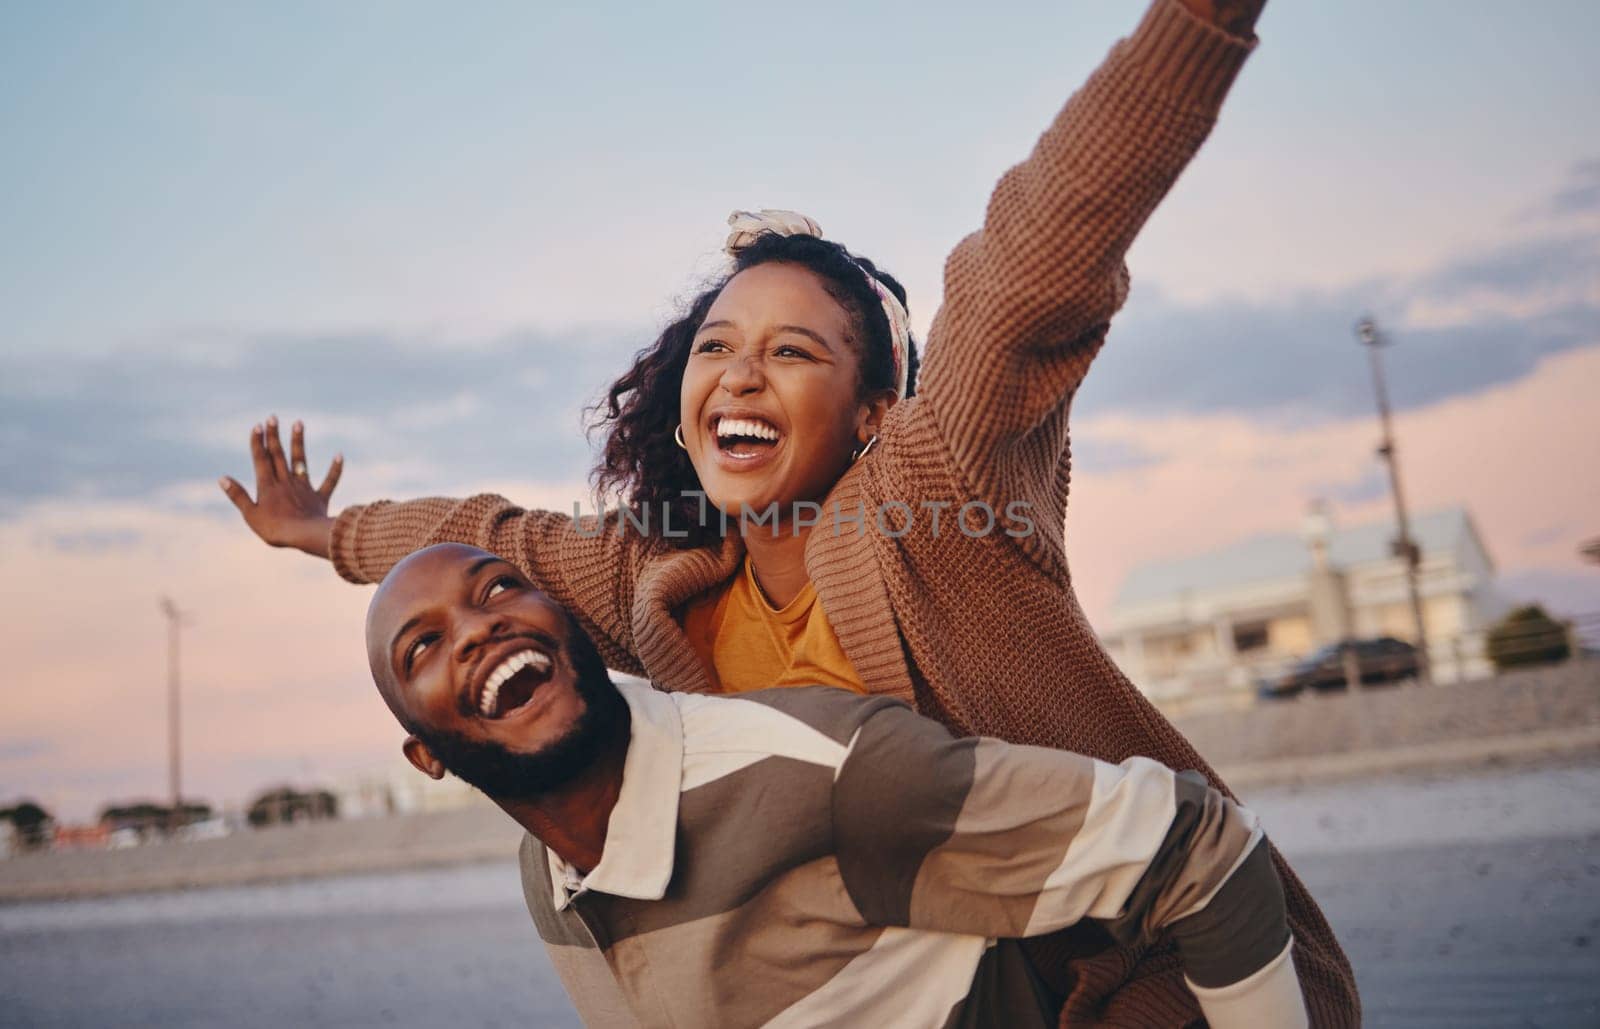 Freedom, love and happy with couple and piggy back ride together on outdoor date for support, sunset or lifestyle vacation. Smile, summer and airplane with man and woman on holiday for relax or faith.